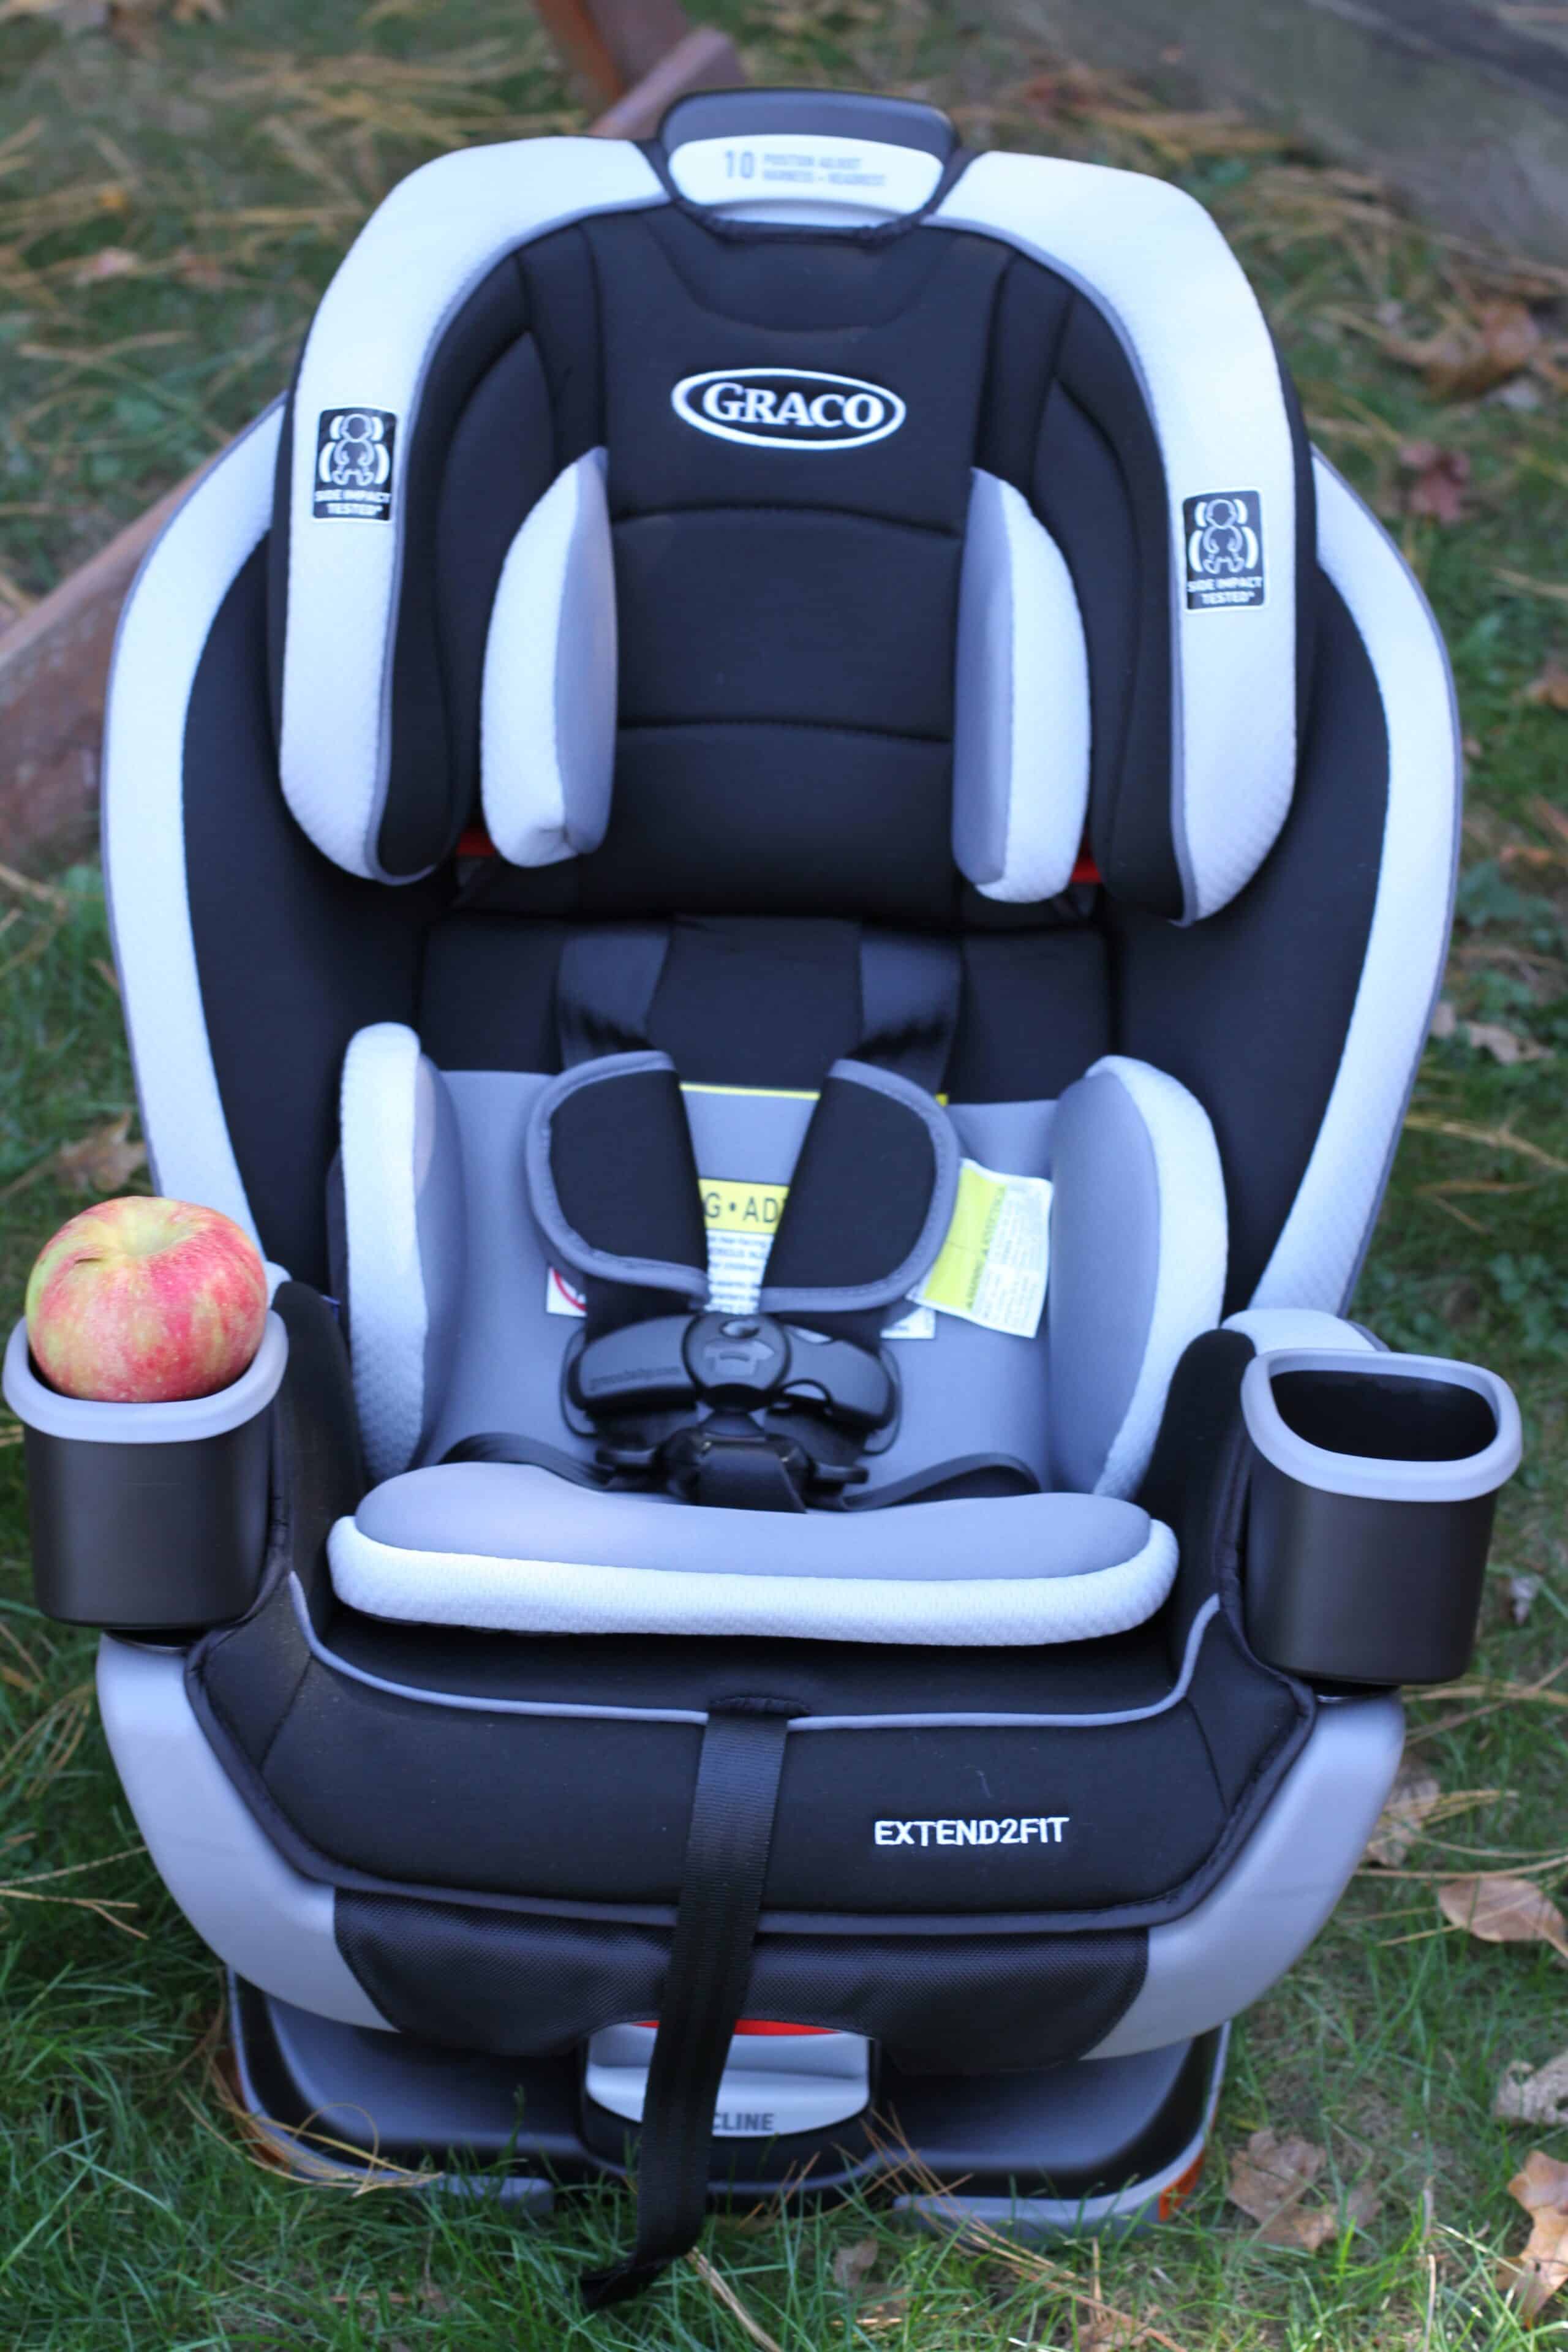 Graco Extend2Fit 3-in-1 car seat - The Chirping Moms